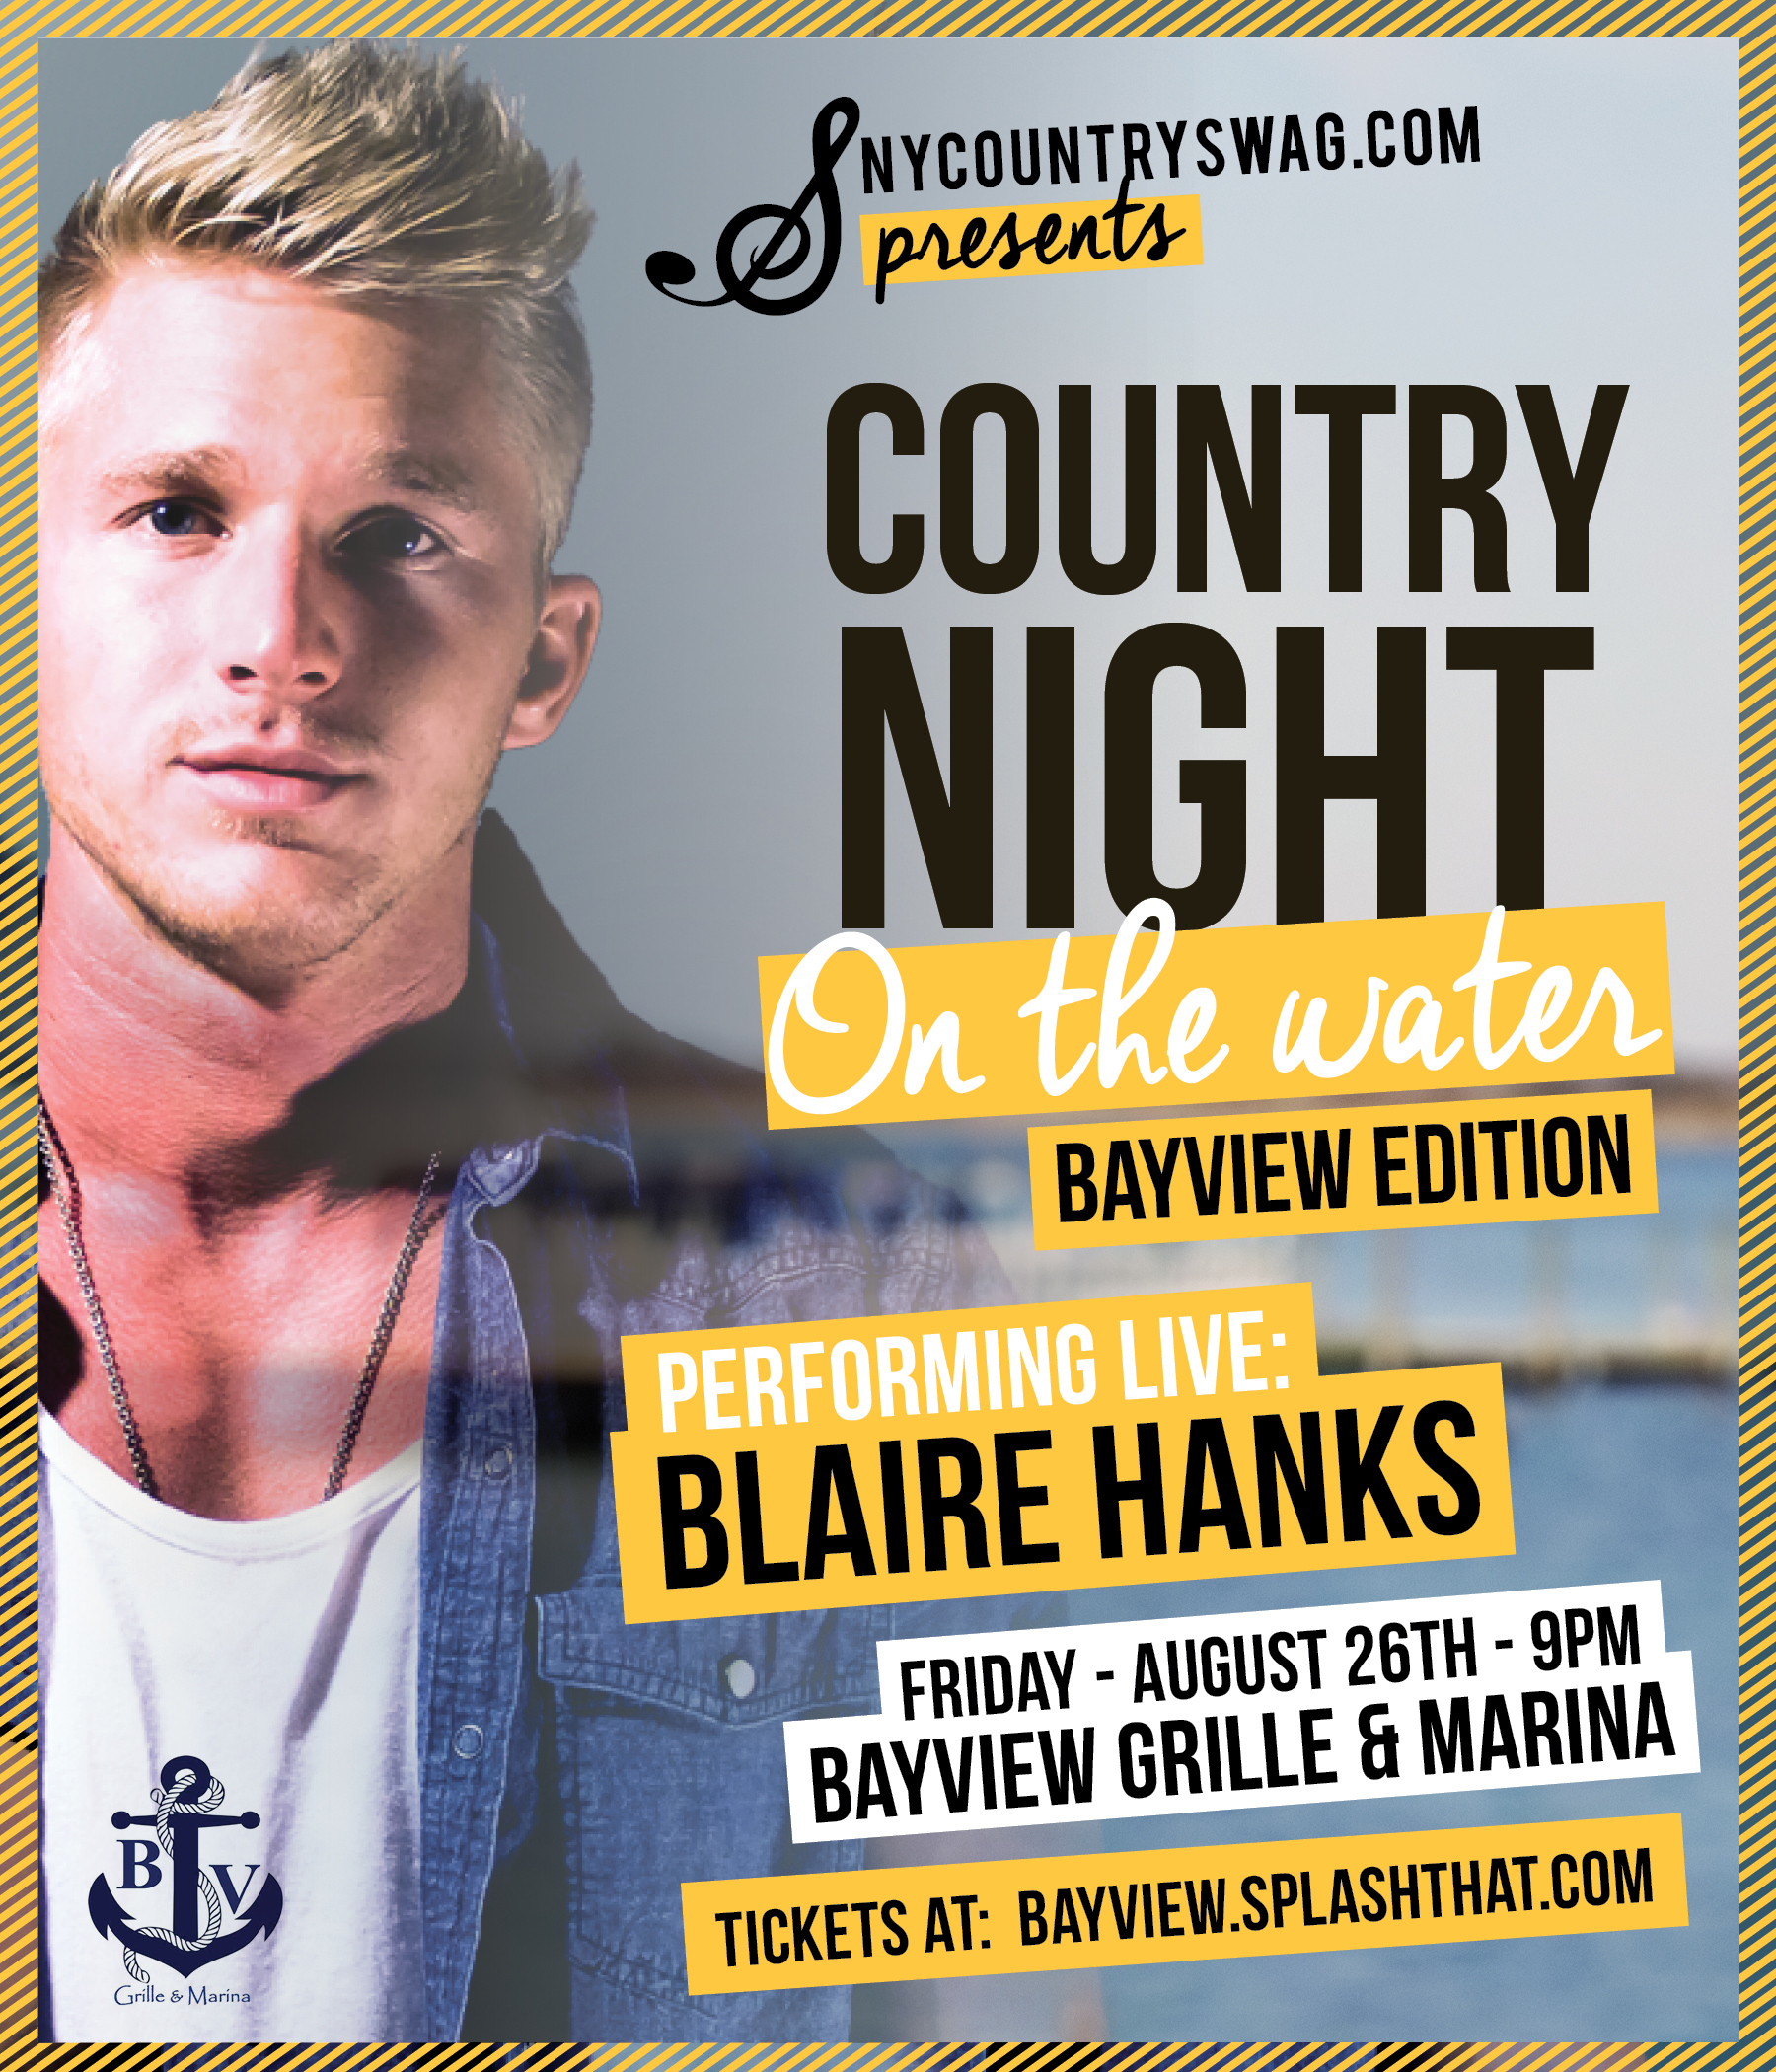 Bayview Grille - Blaire Hanks